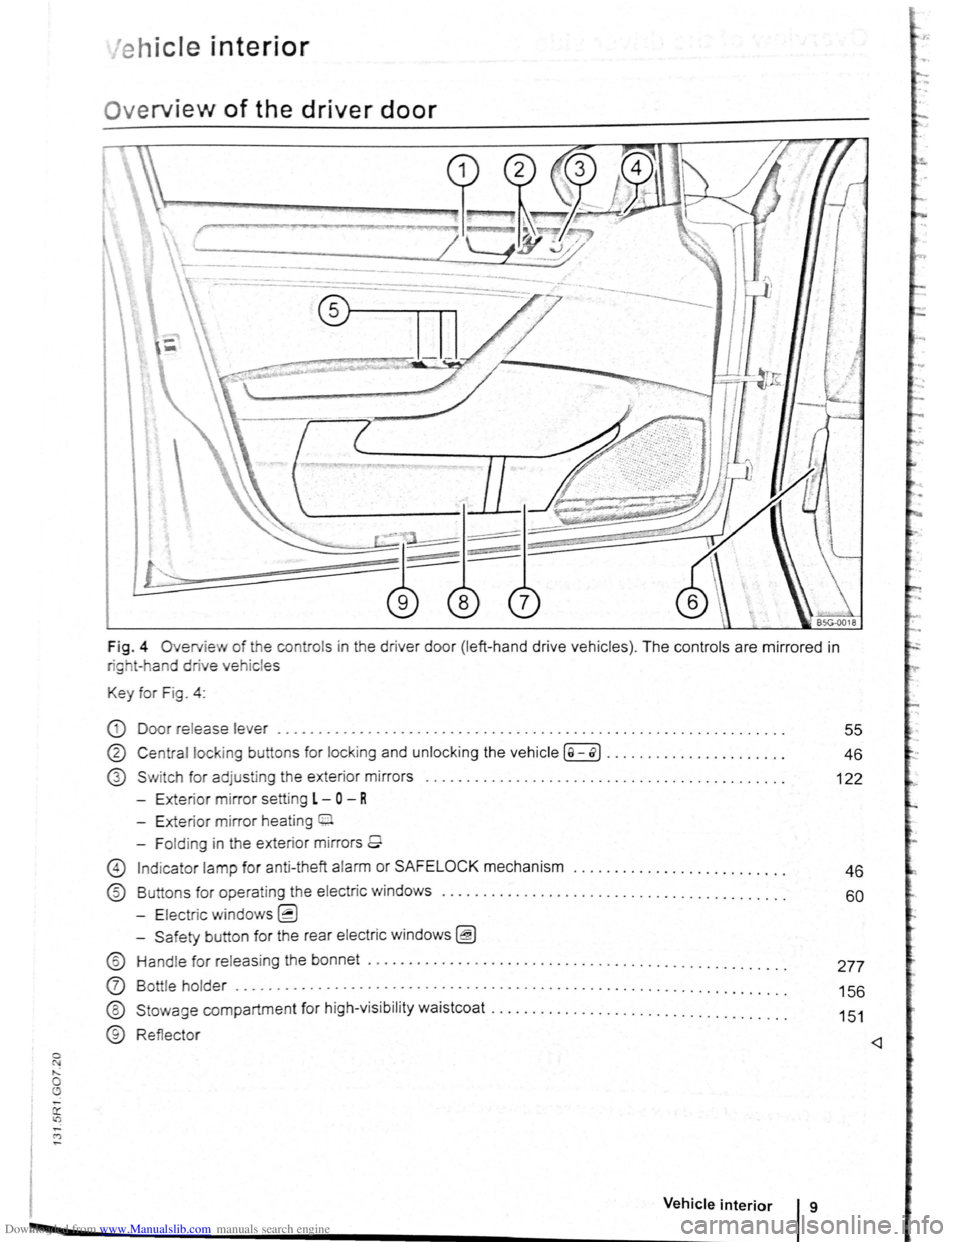 VOLKSWAGEN BEETLE 2009  Owners Manual Downloaded from www.Manualslib.com manuals search engine 0 N ,..; 0 
e h ic le interior 
Ov erview of the driver door 
Fig . 4 Overv ie w of the  contro ls  in  the drive r doo r (left -ha nd  dr ive